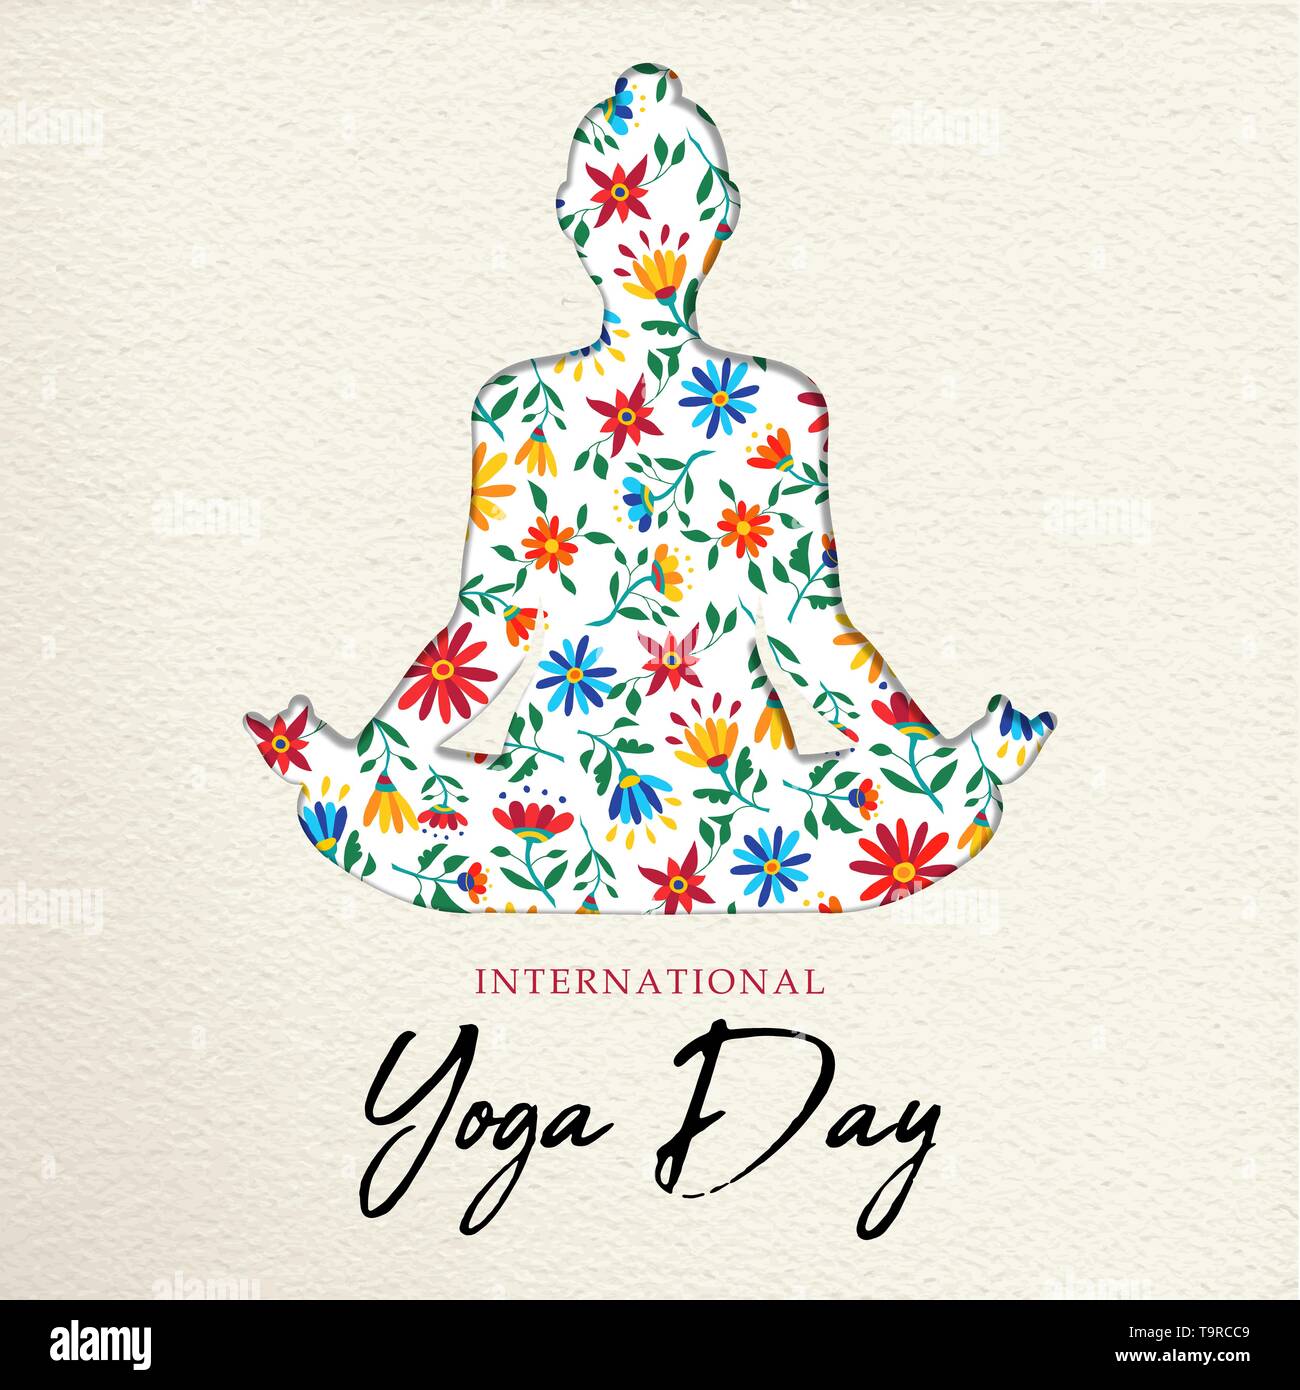 Yoga day greeting card illustration. Woman doing lotus pose meditation made of colorful spring flowers. Stock Vector